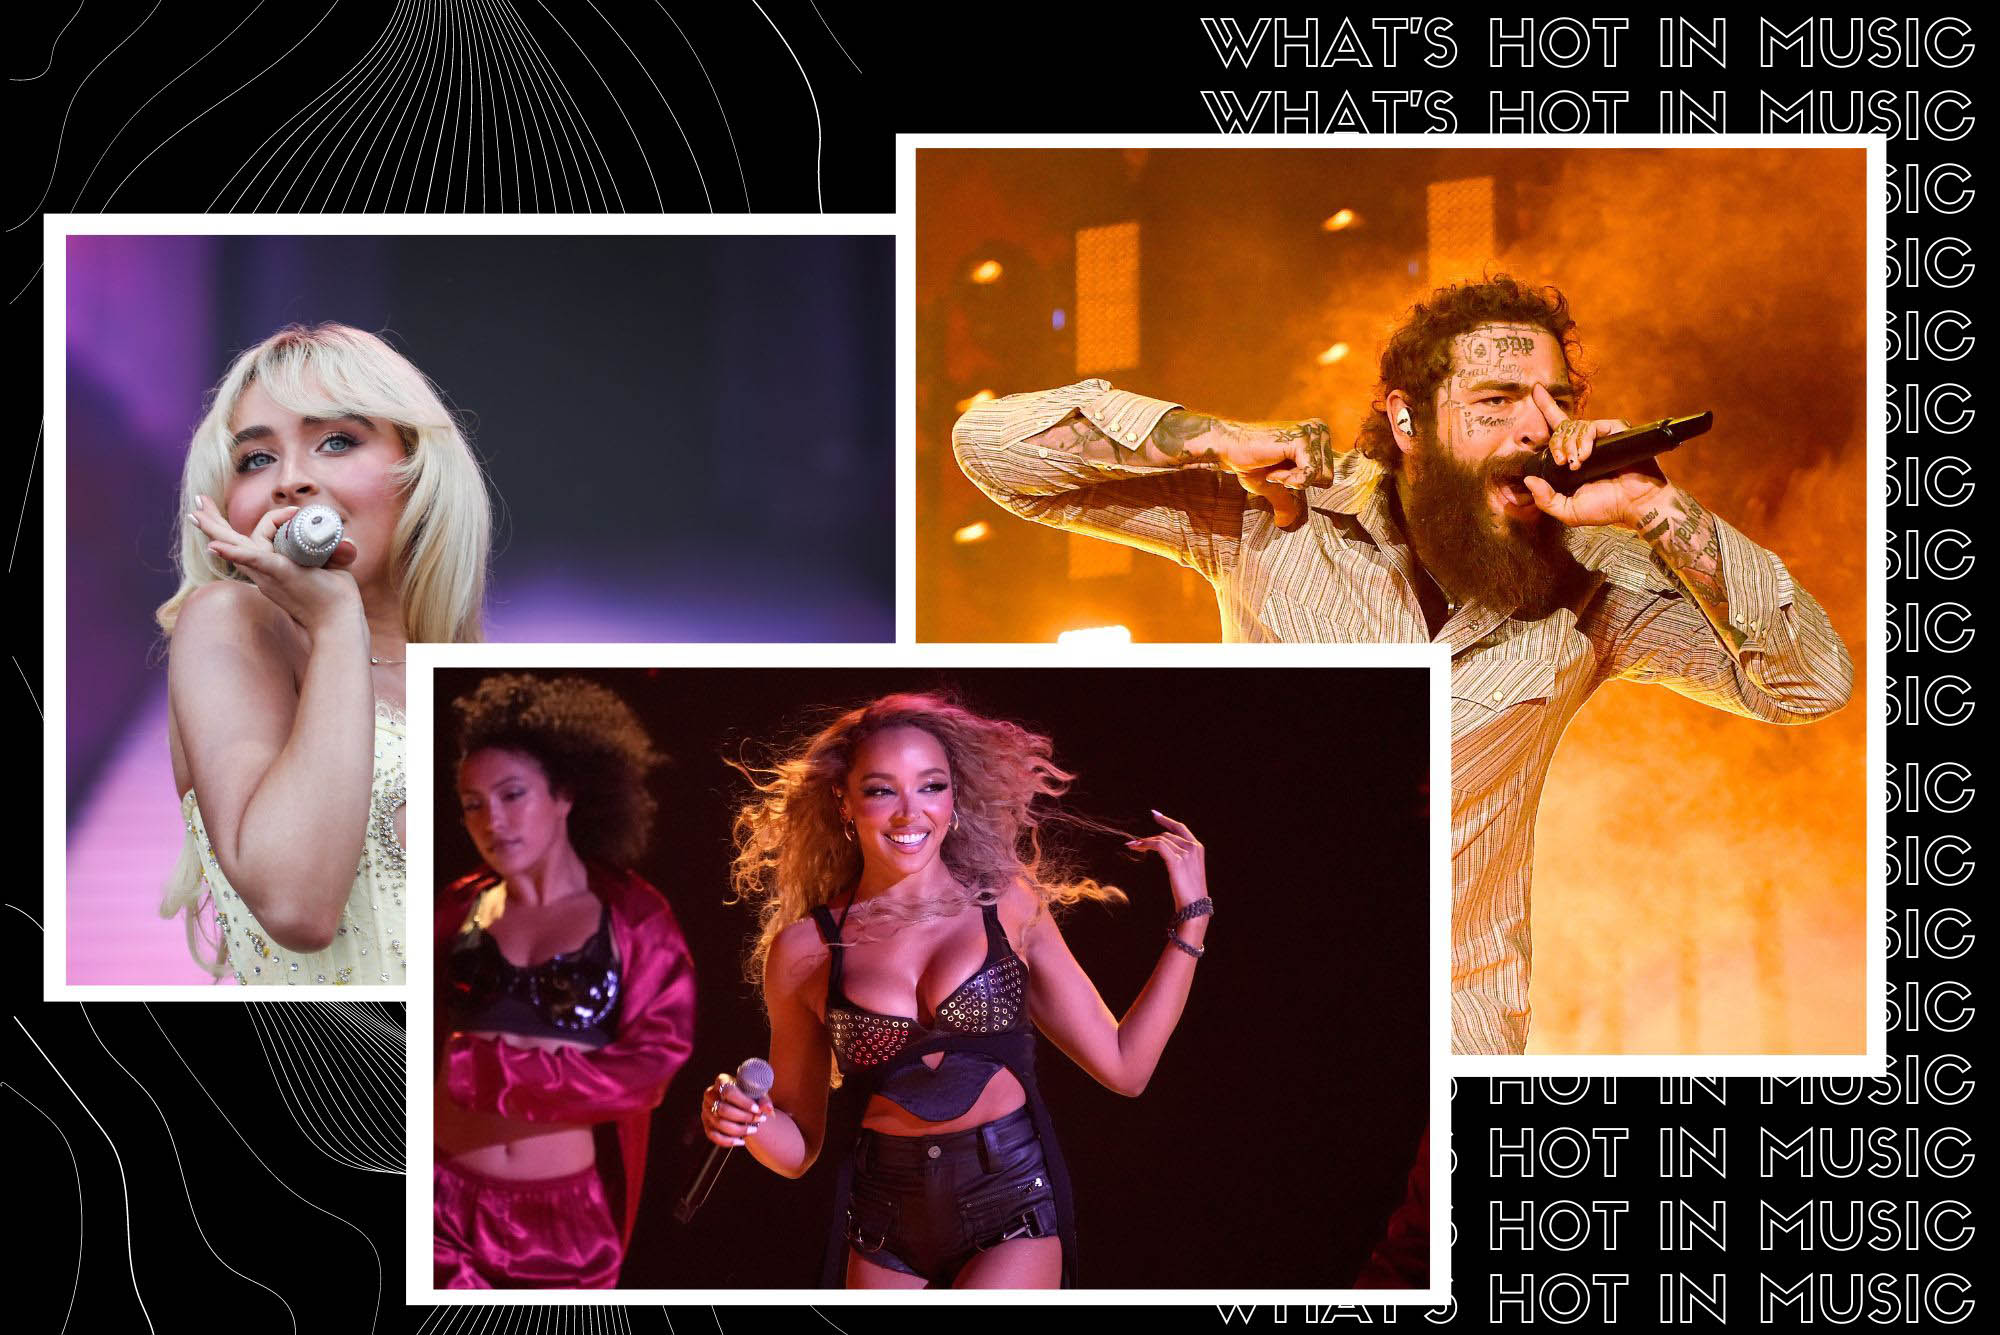 Photo: A collage of three different artists on a black background. Sabrina Carpenter, a blonde white woman sings. In the center, a black woman with long hair wears a bustier and smiles while performing. On far right, a white man, Post Malone, sings into his mic.